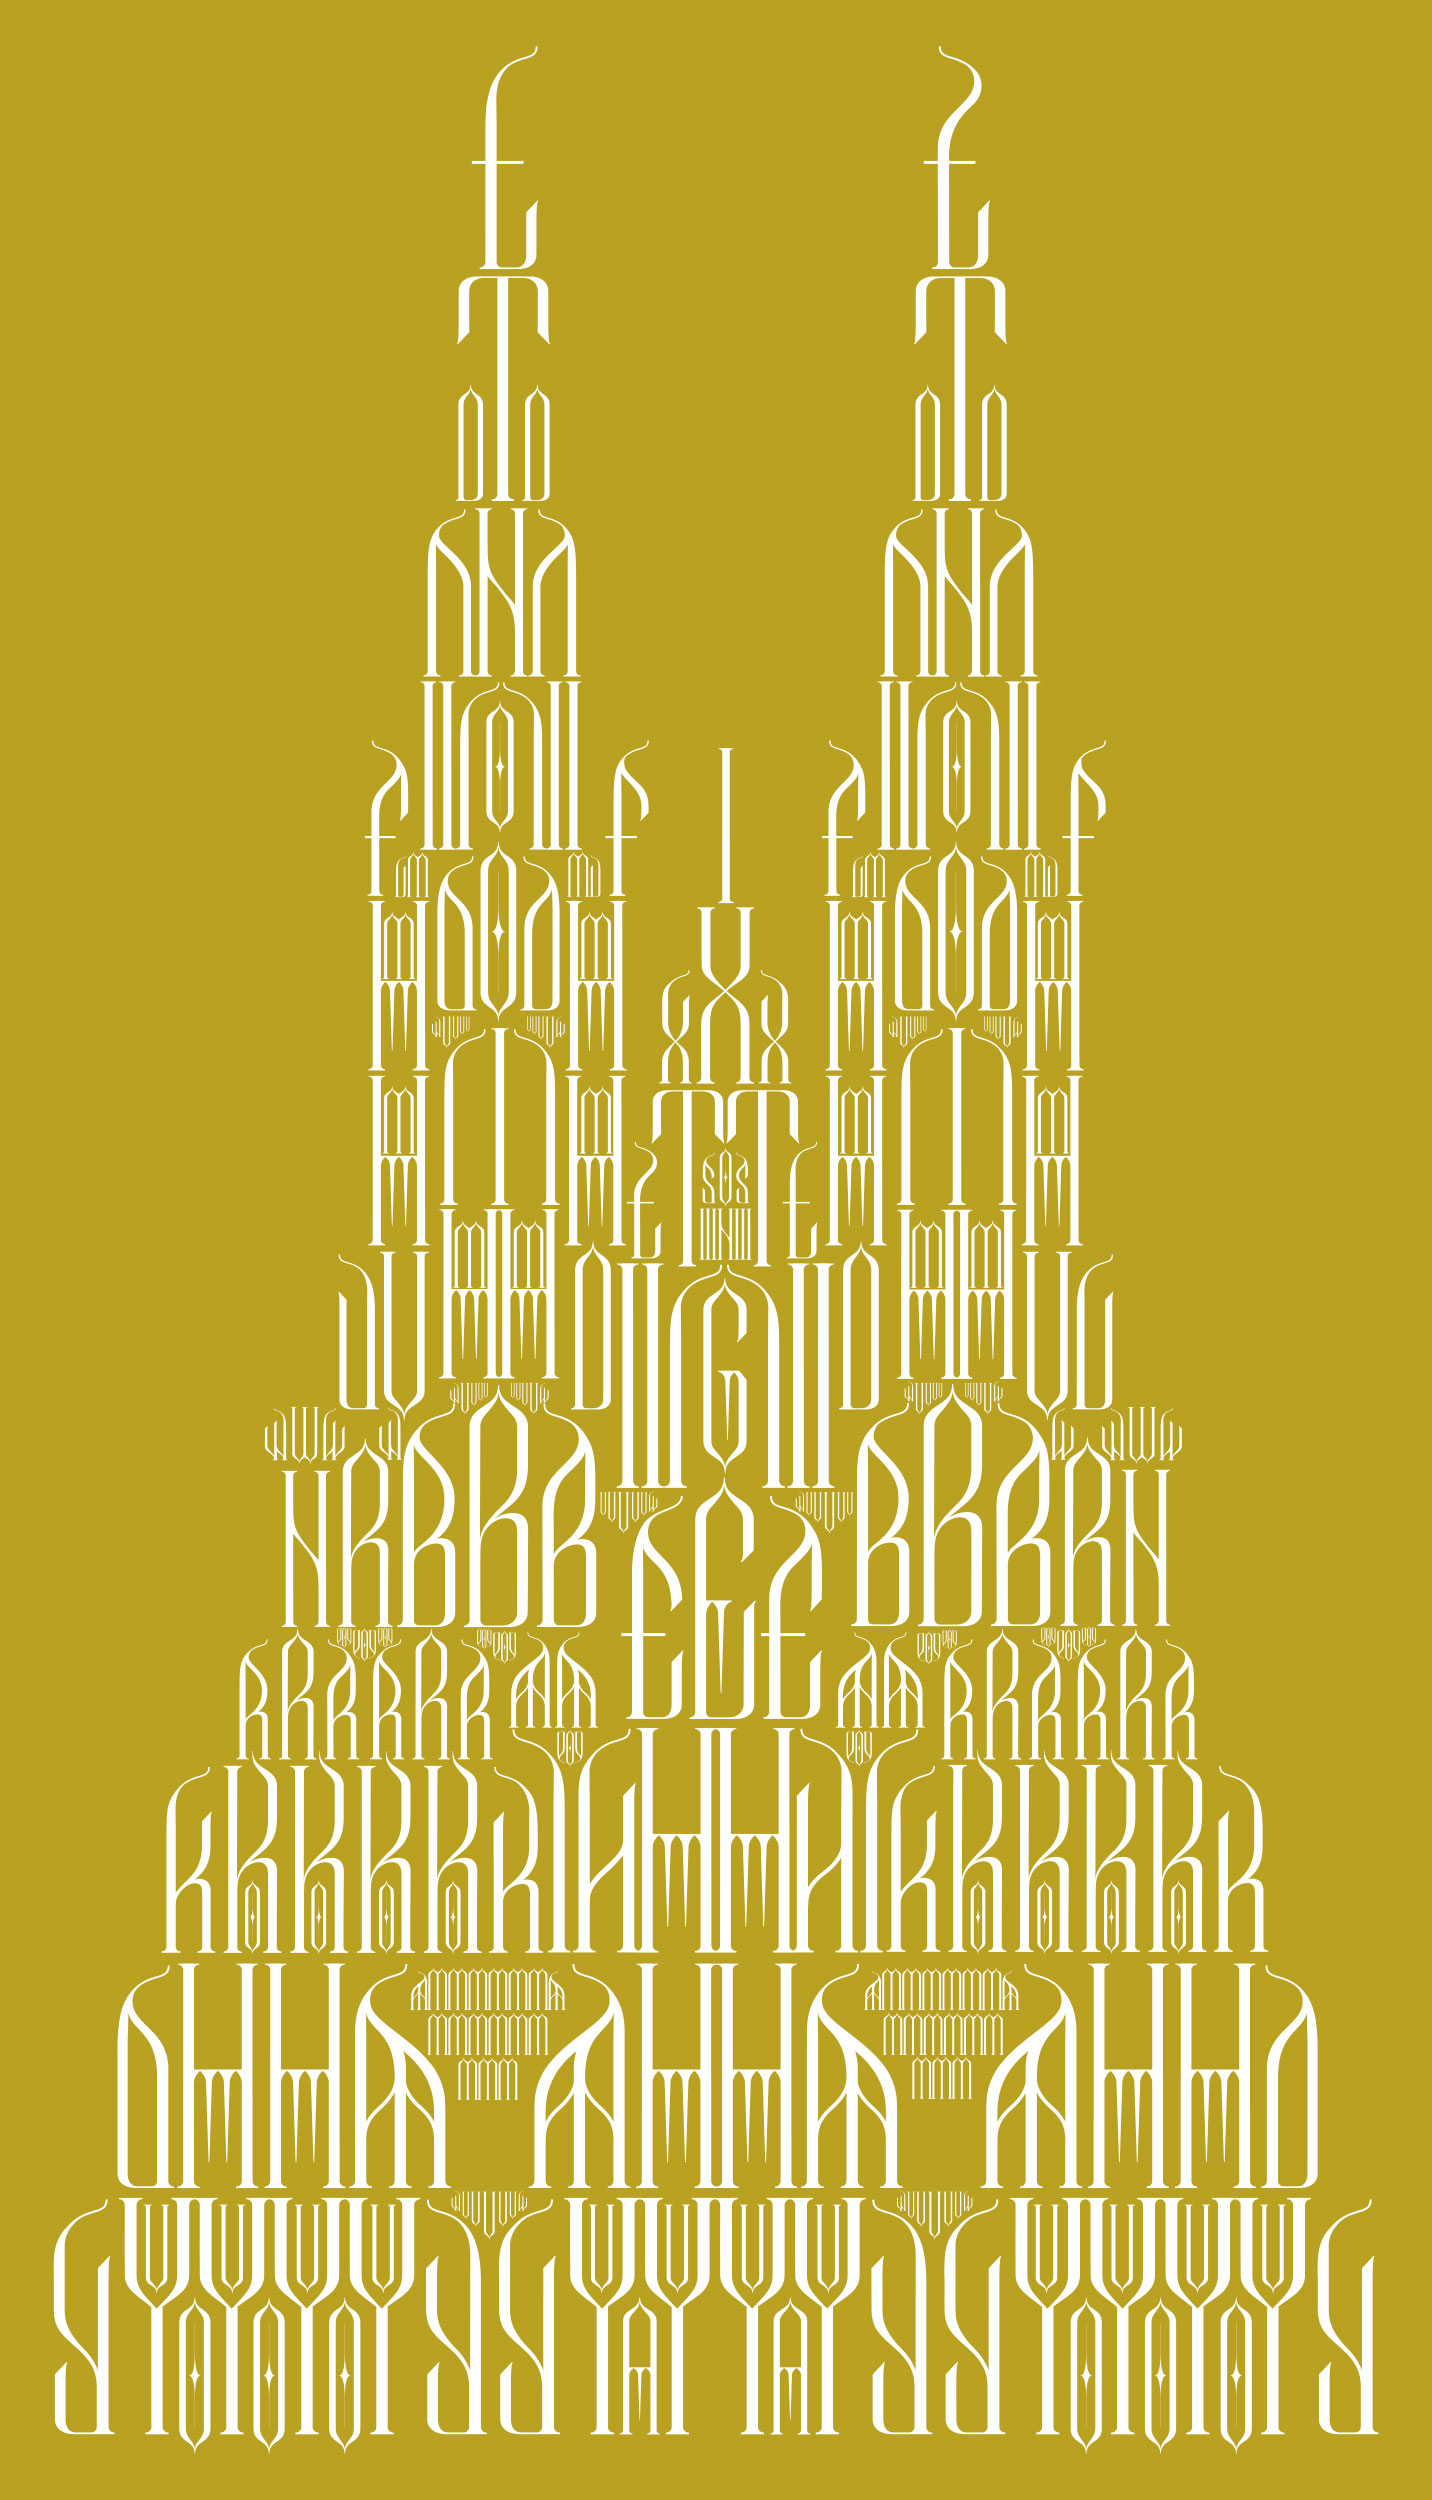 Using Babel letterforms as image. Depicts a cathedral-like structure.